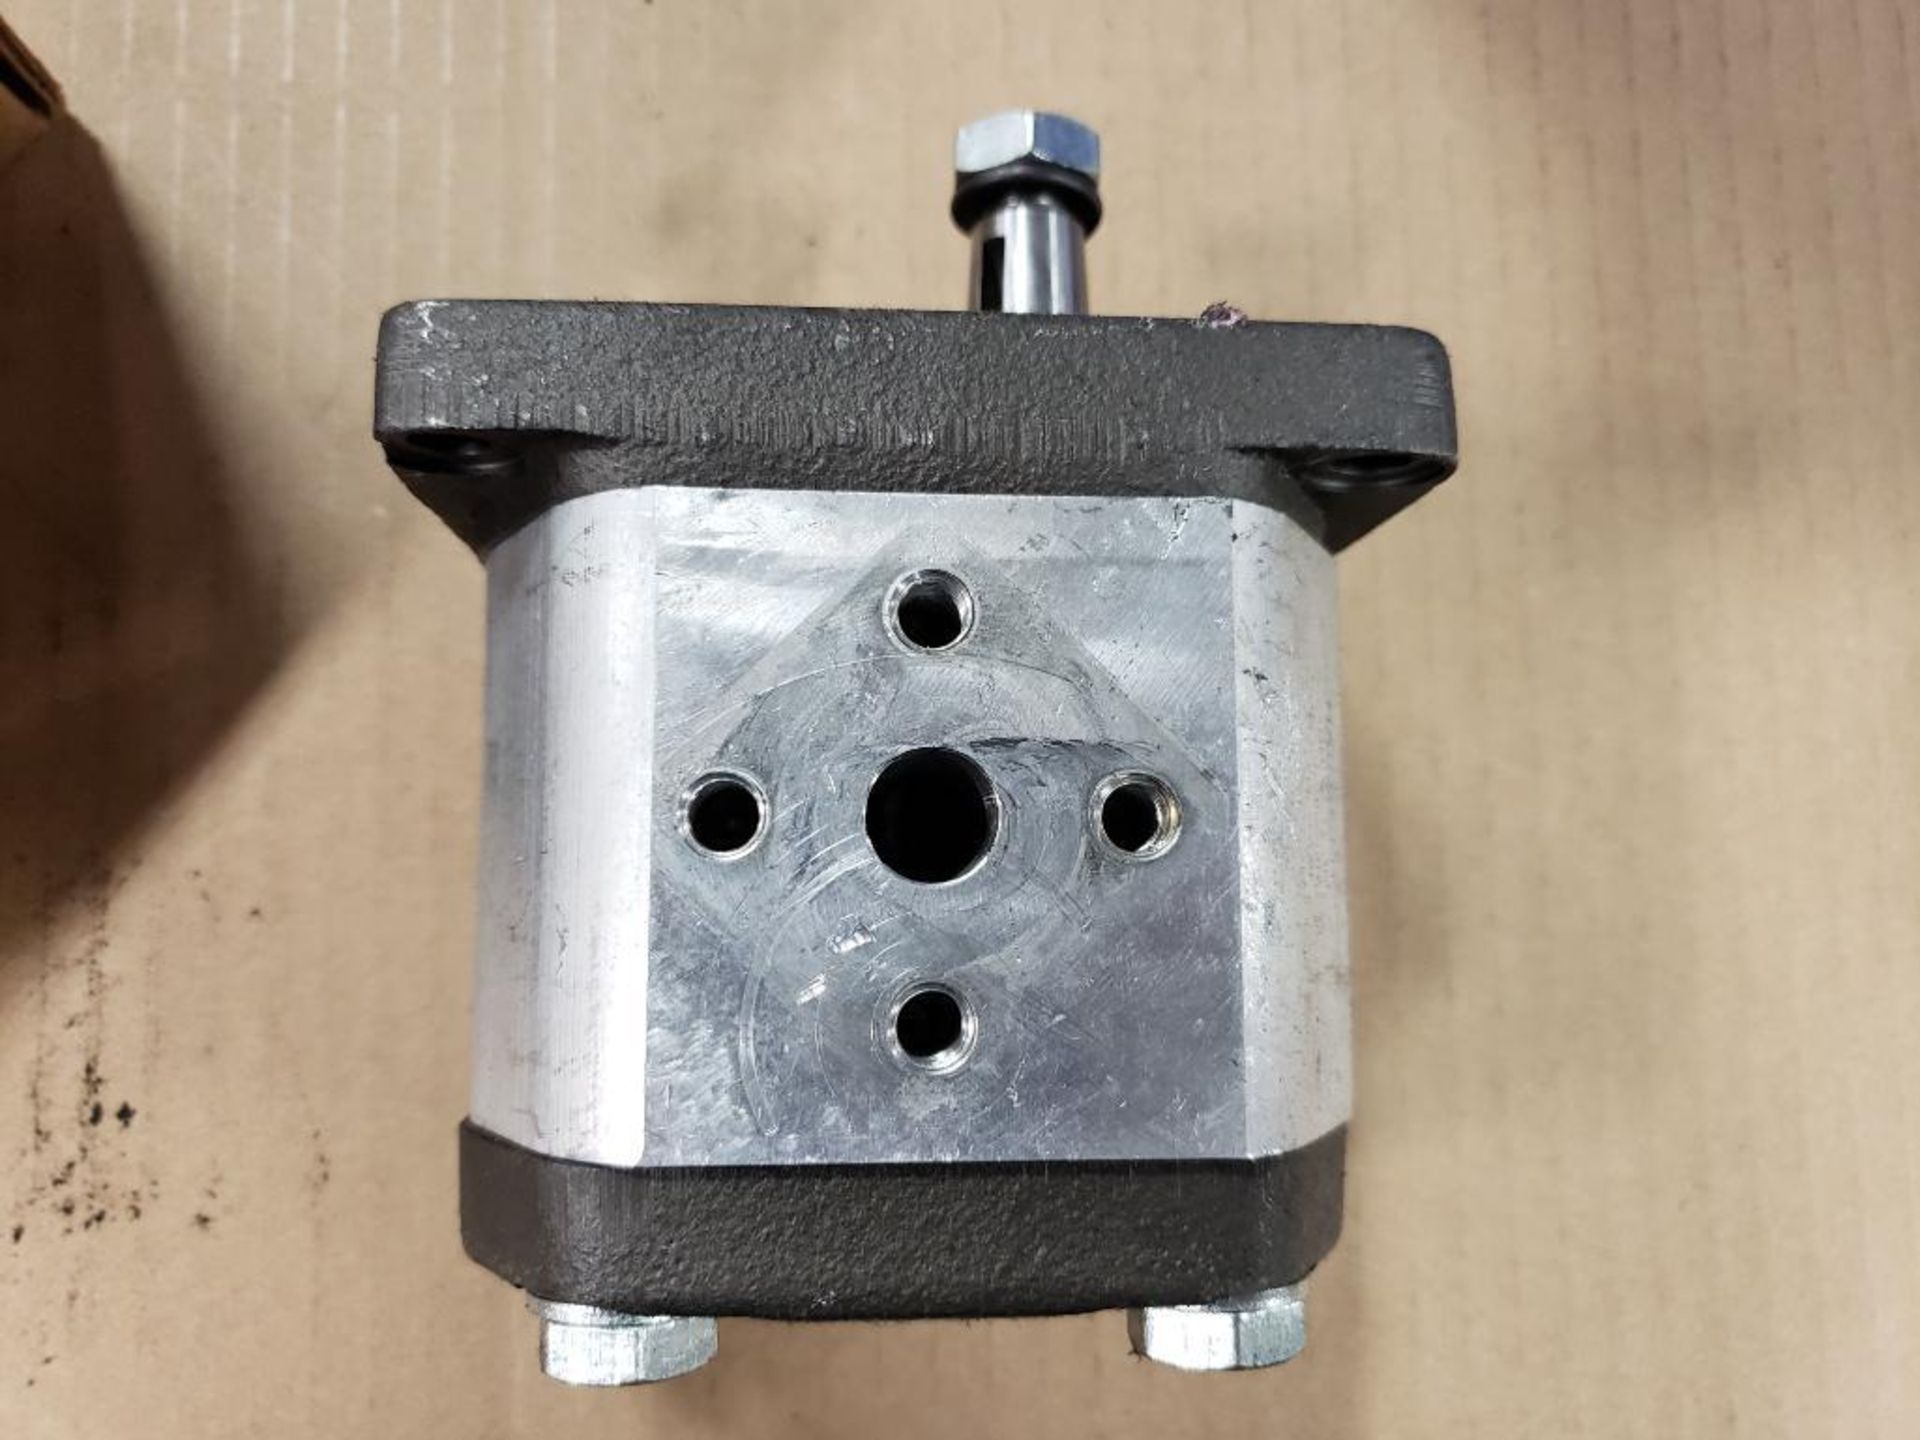 Qty 2 - Gear pumps. Part number N1090003. - Image 5 of 9